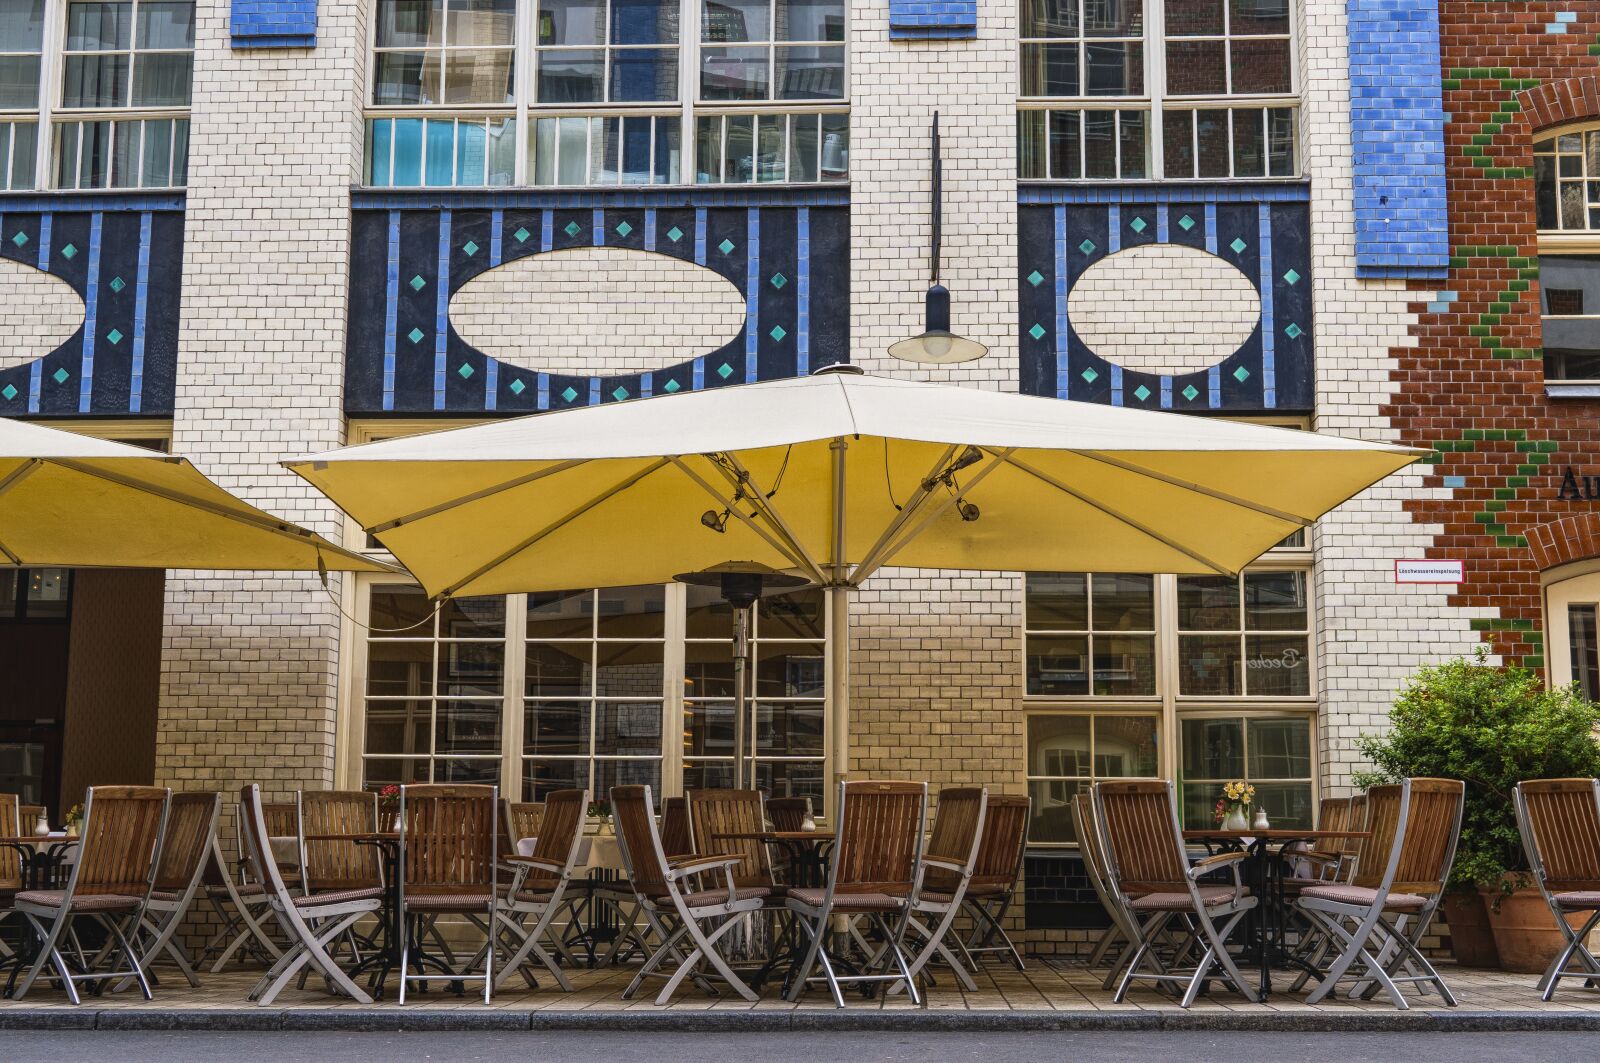 Sony a6300 sample photo. Cafe, parasol, chairs photography